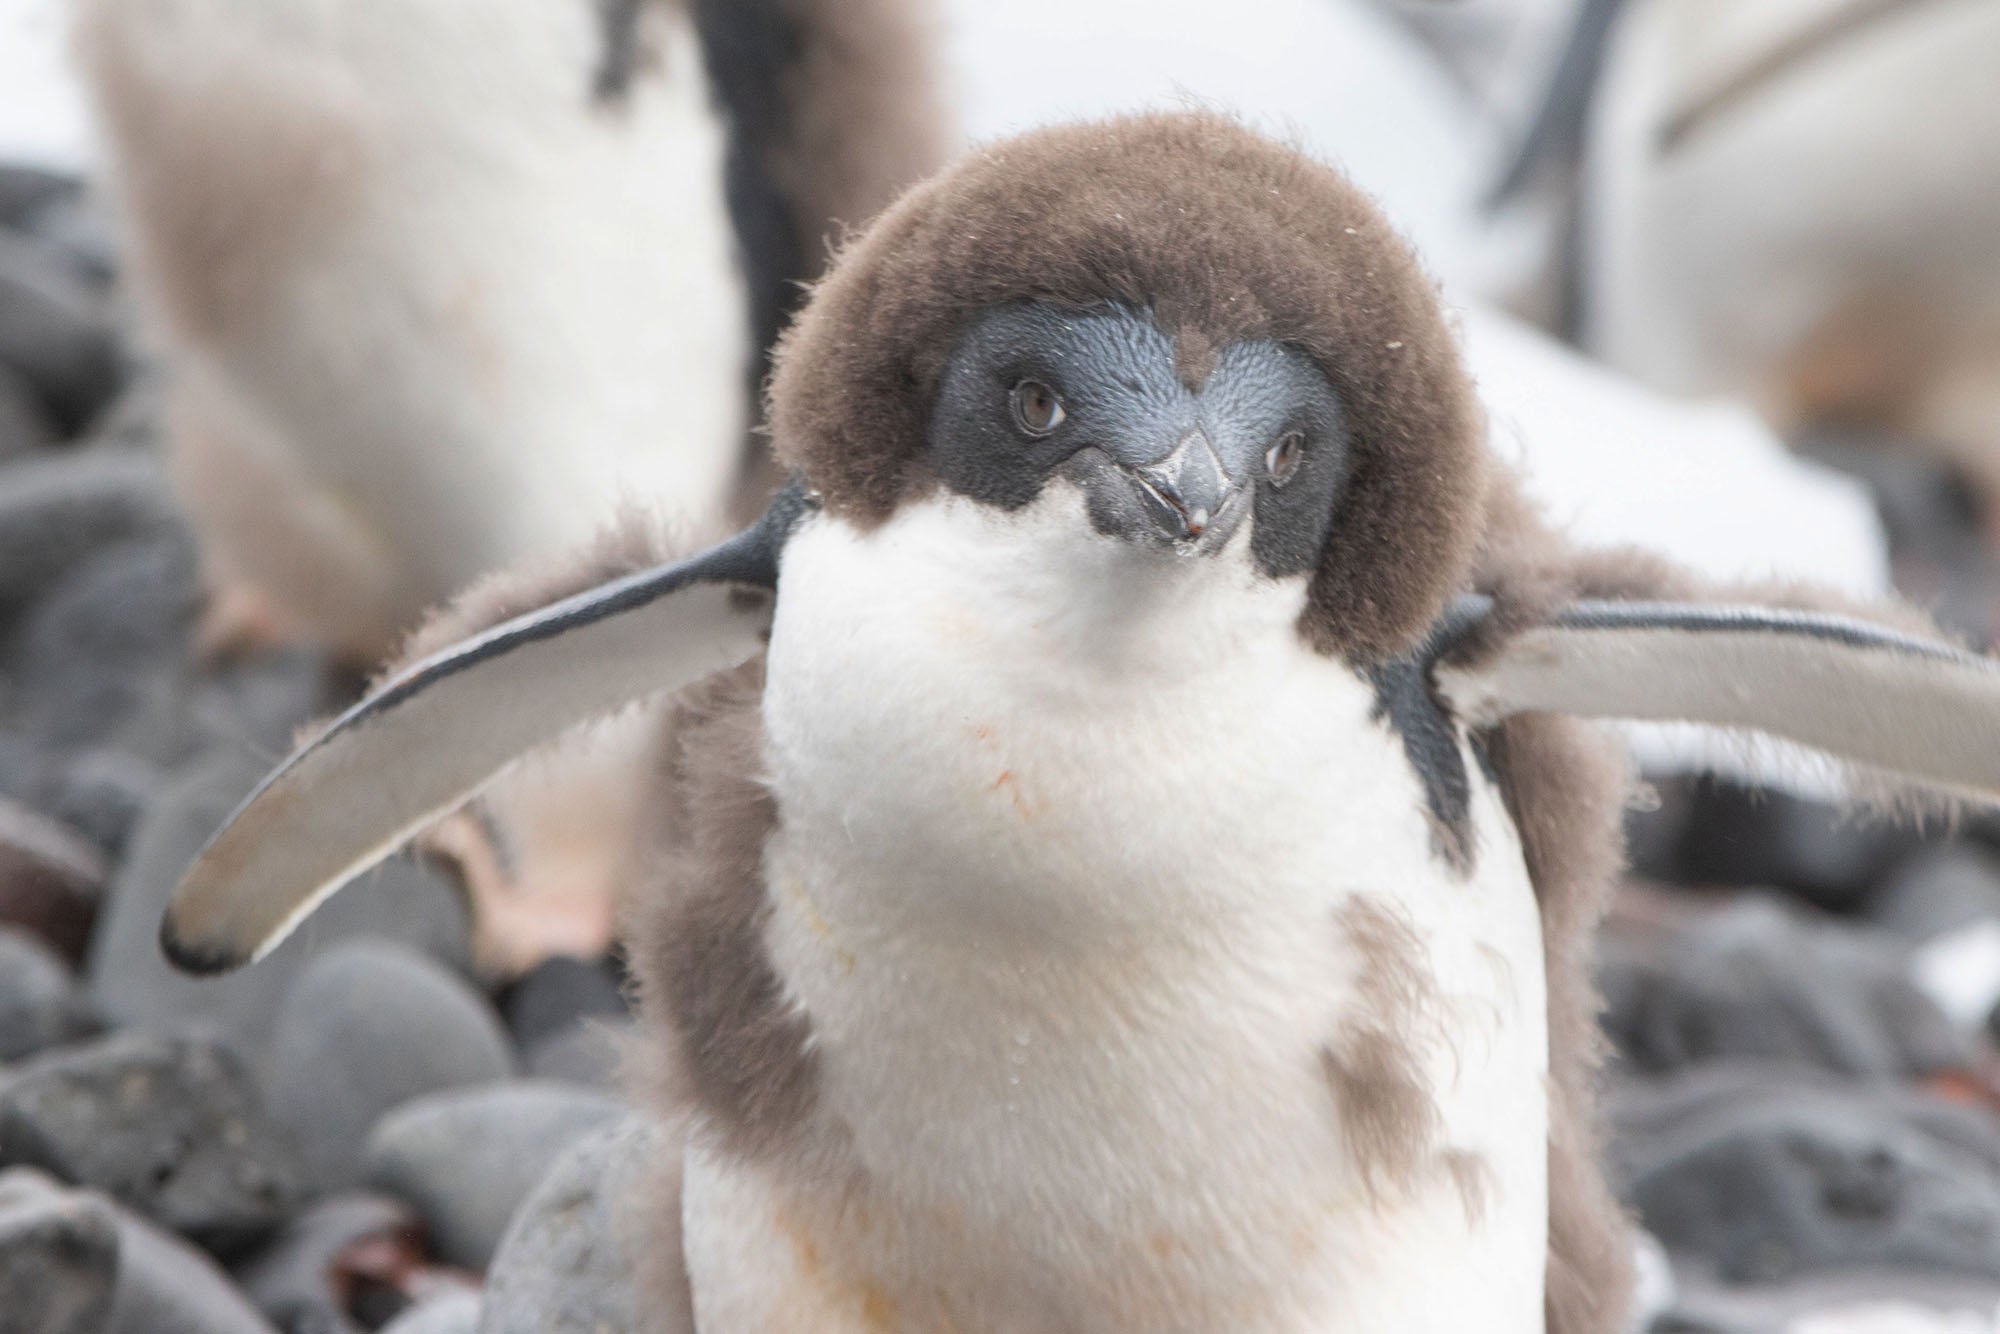 penguin chick with fuzzy brown feathers on its head